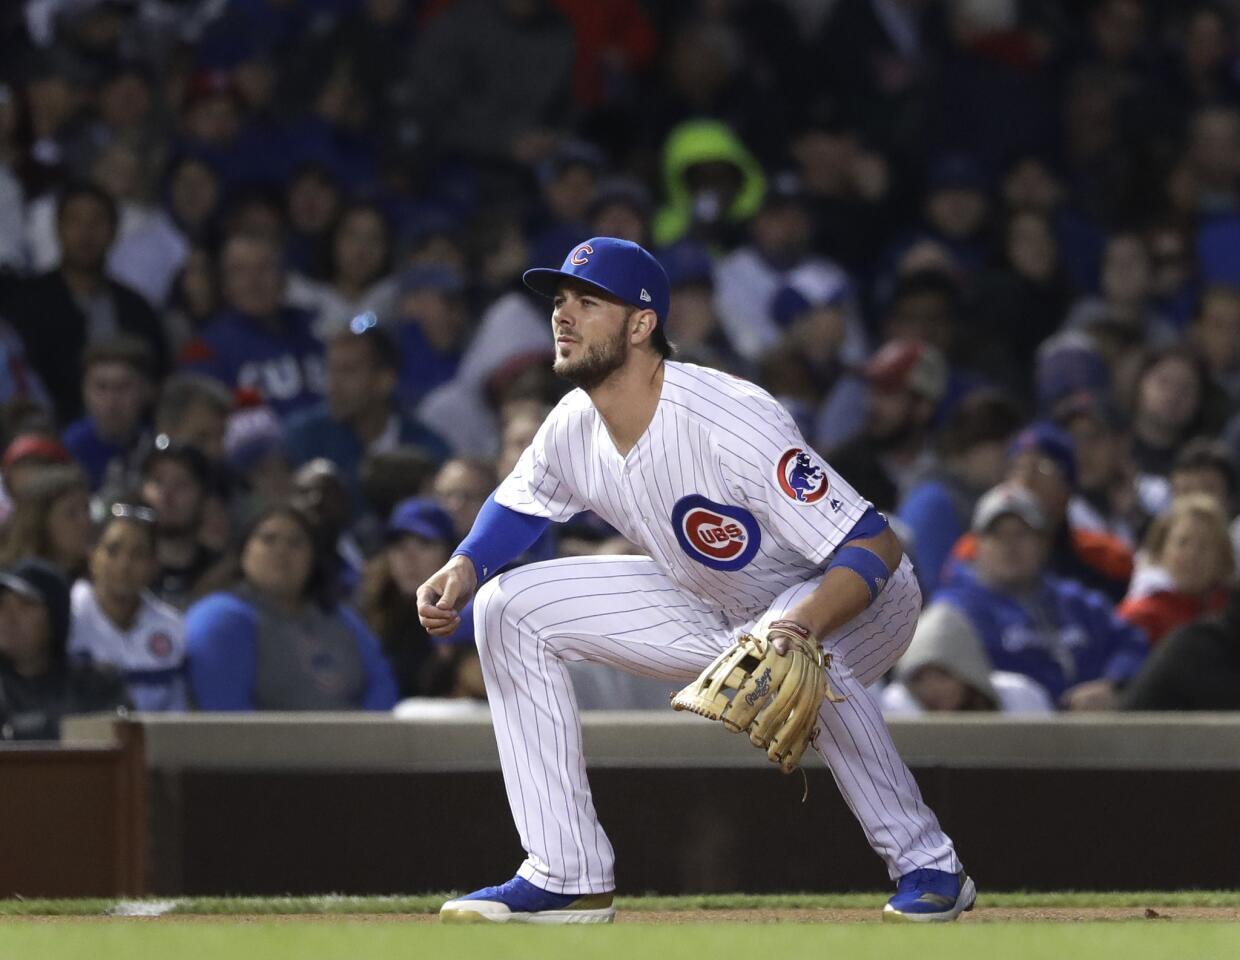 Cubs third baseman Kris Bryant prepares to field a ball during the sixth inning against the Phillies Tuesday, June 5, 2018, at Wrigley Field.